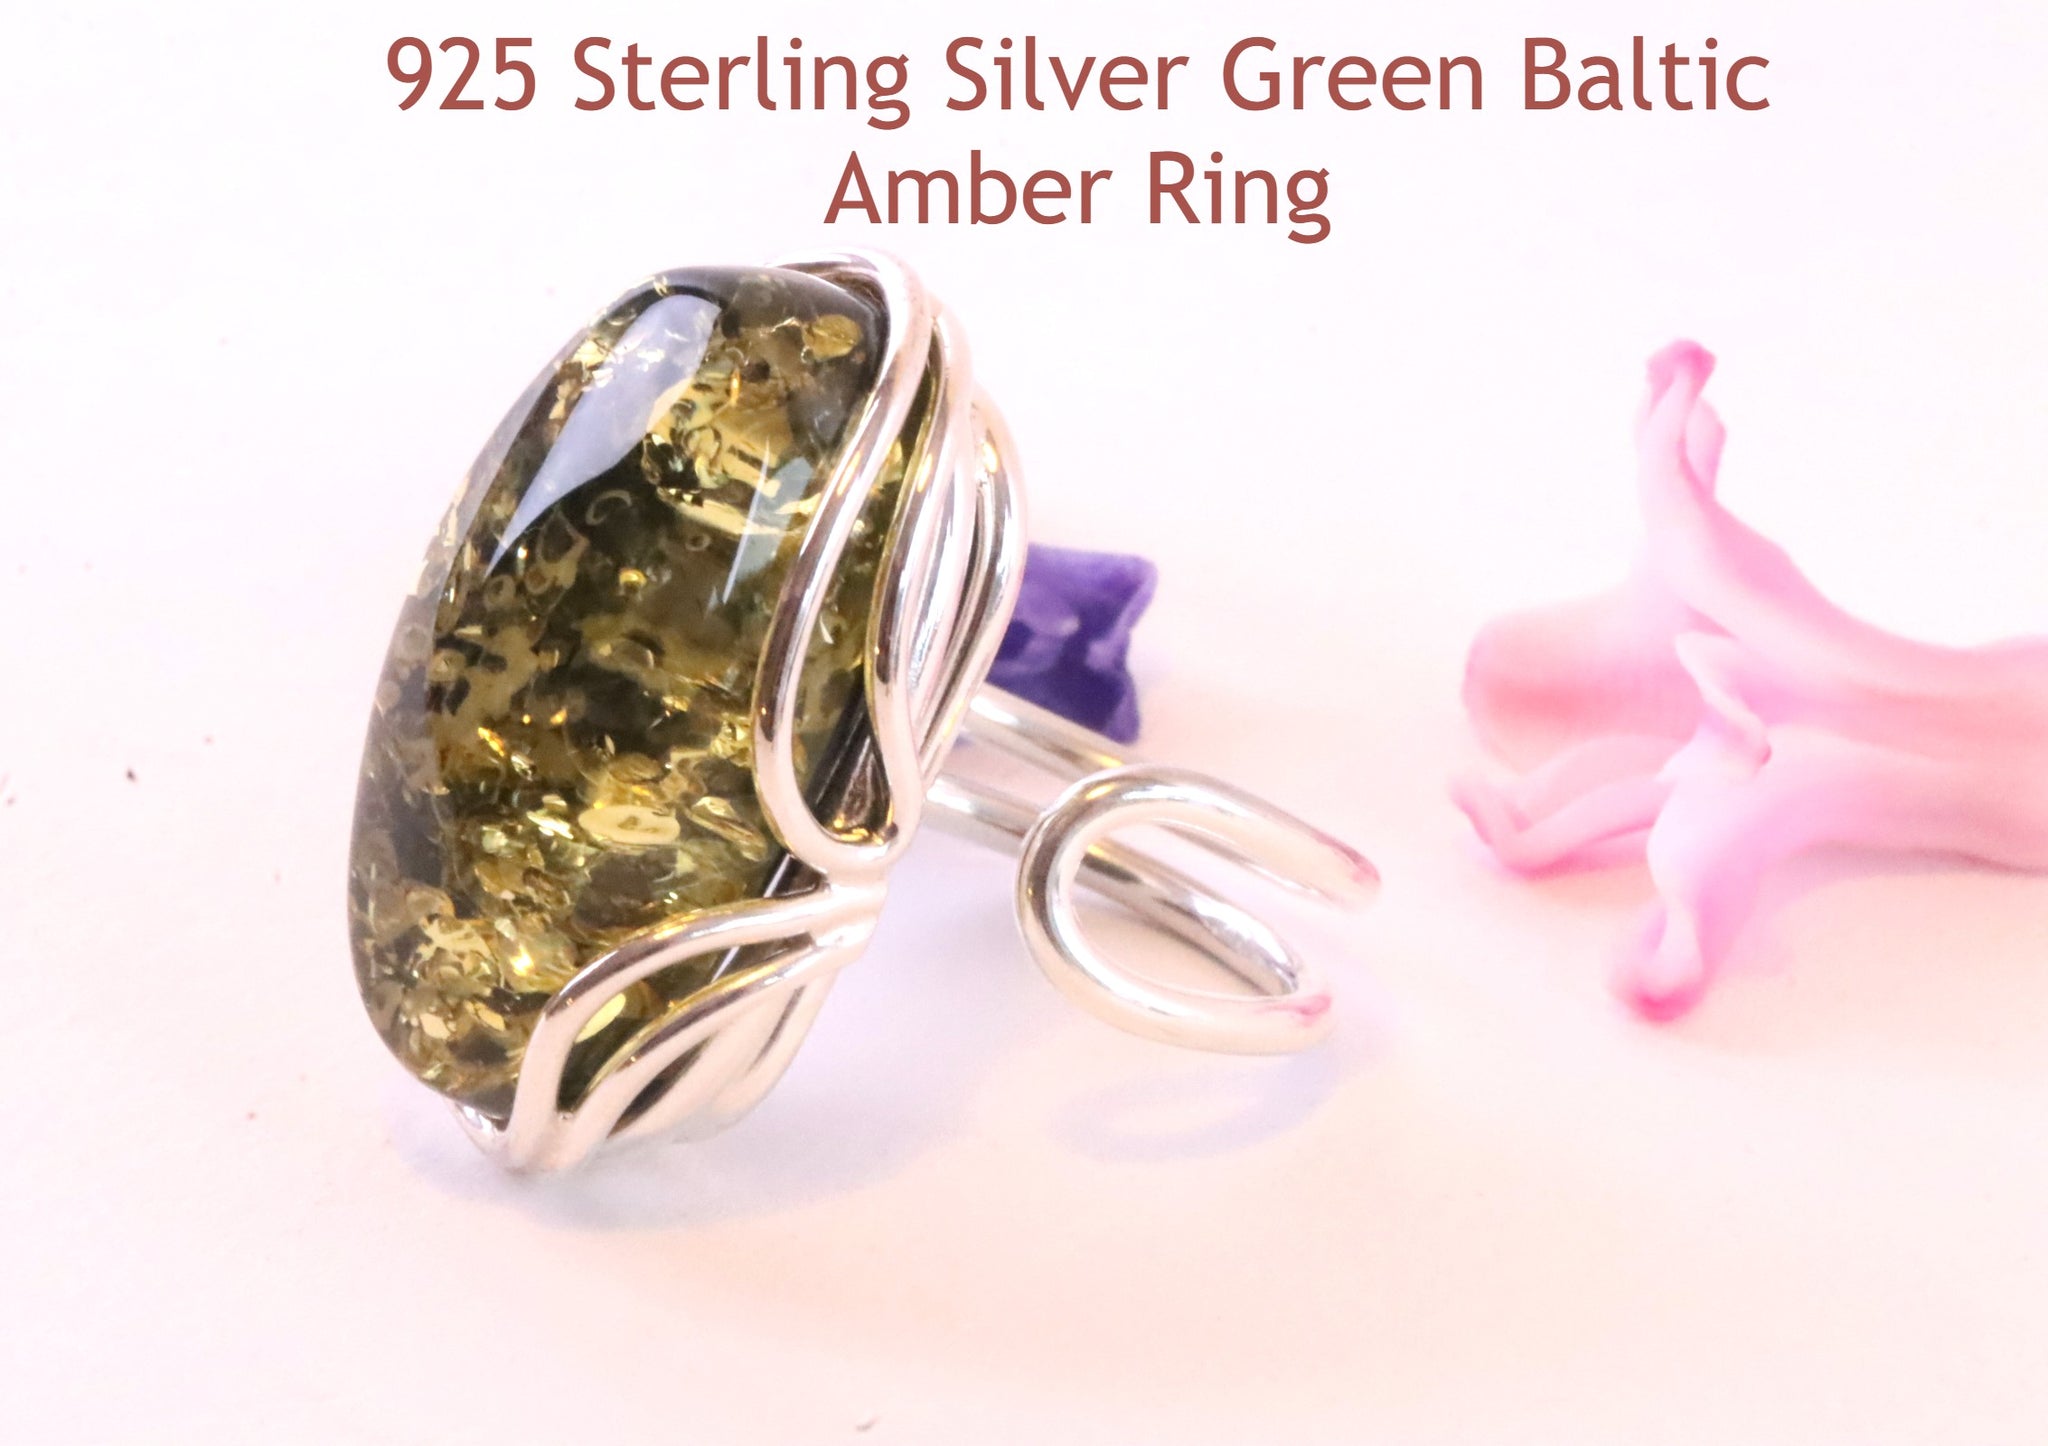 Valentine's Day Gift 925 Sterling Silver Green Baltic Amber Ring